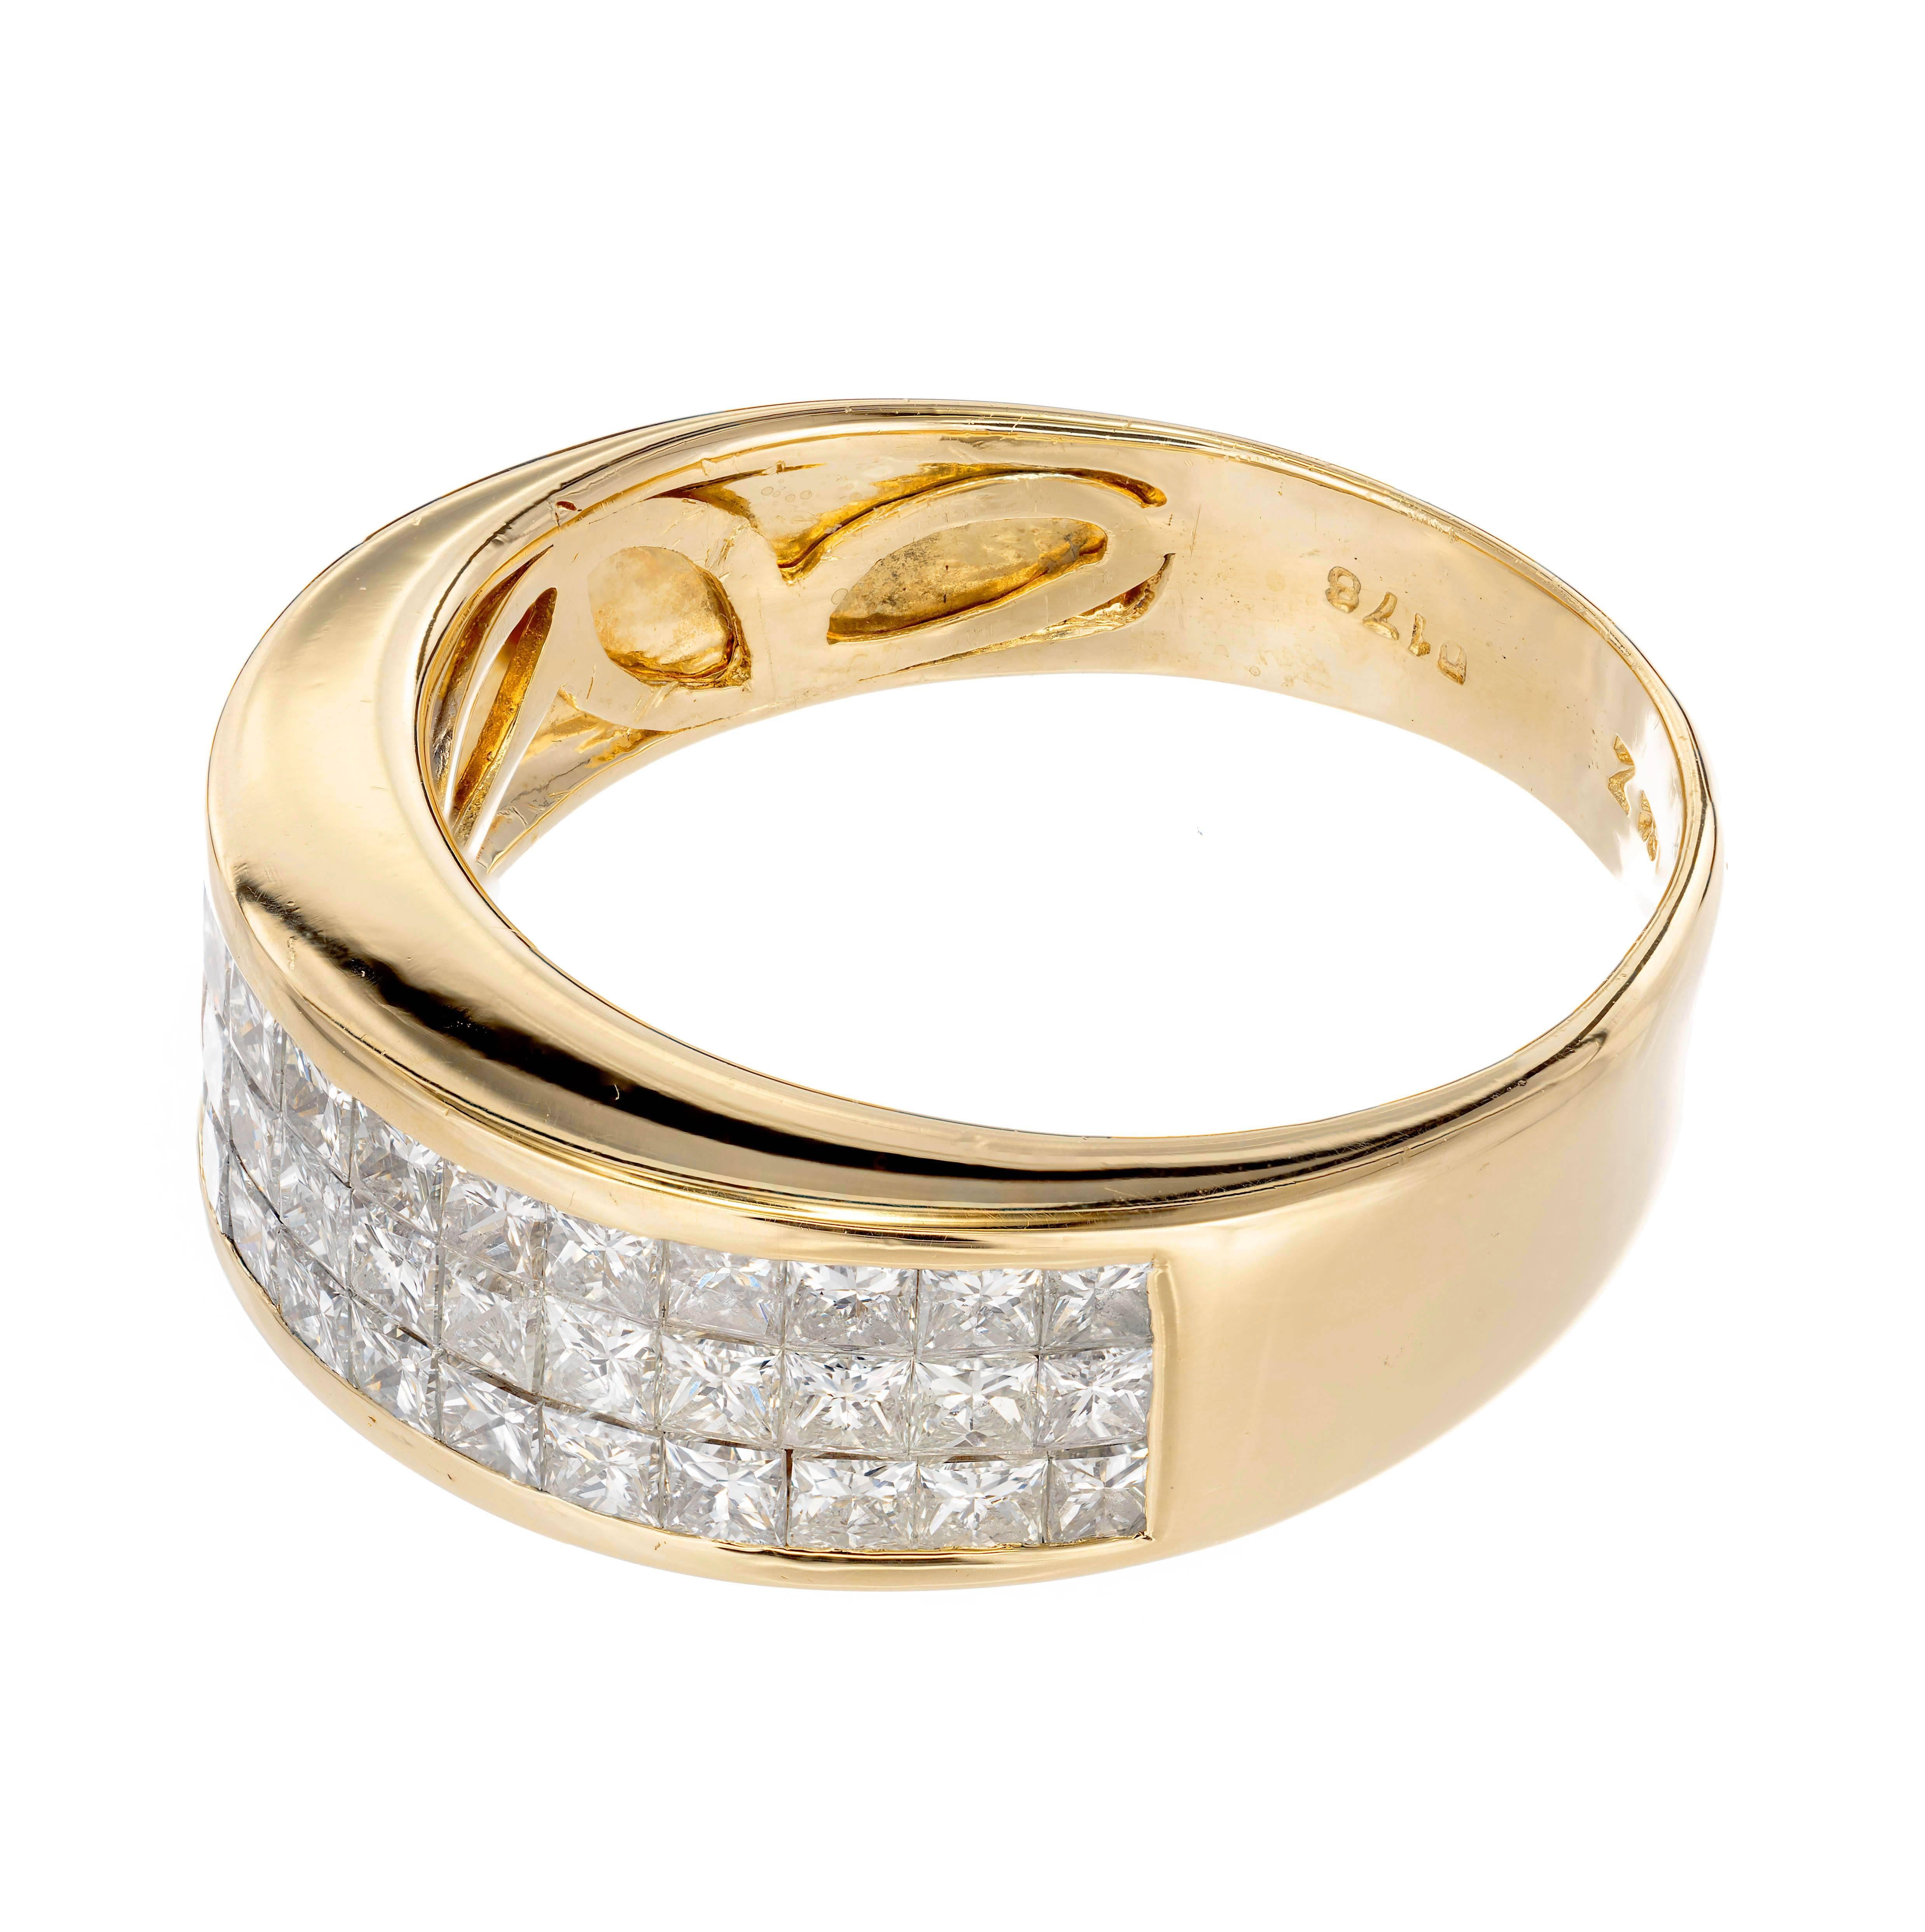 Invisible set three row princess cut diamond 1.50ct domed band ring in 18k yellow gold.

42 princess cut diamonds G-H VS approximate 1.50 carats
Size 8 ½ and sizable
18k Yellow Gold
Stamped: 18k
Hallmark: Z 0178
7.0 Grams
7.44mm wide at top
4.11mm